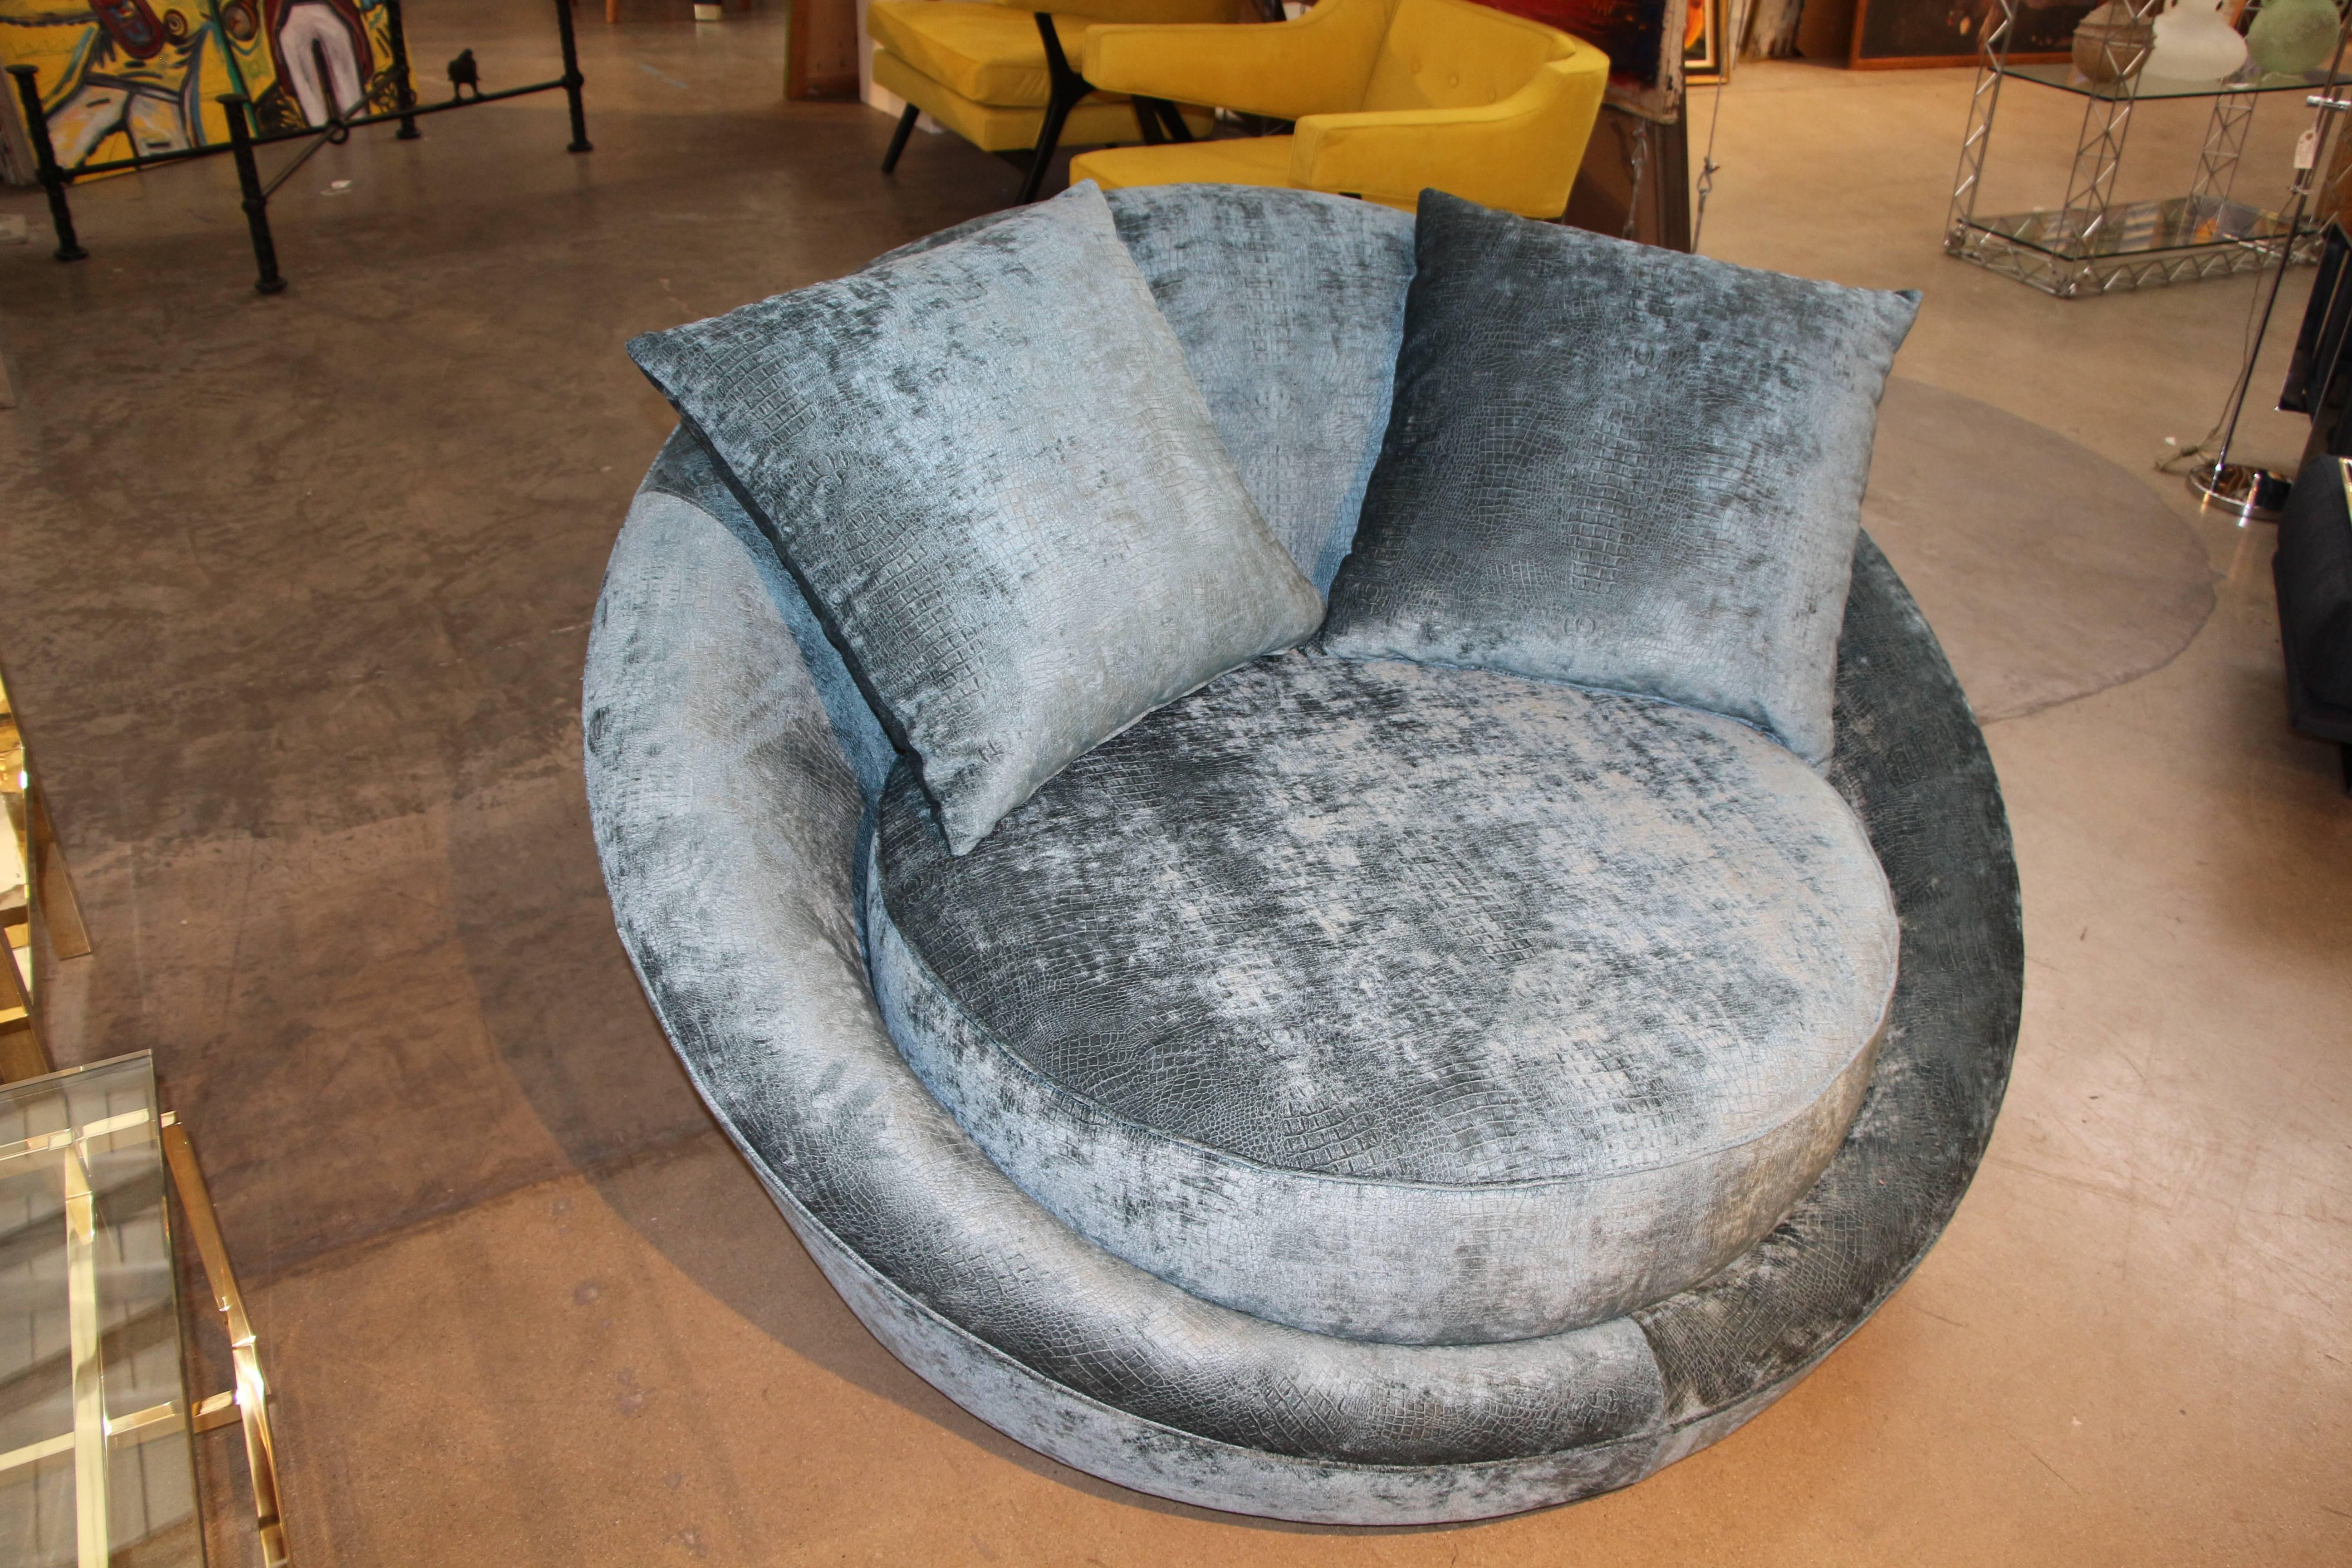 A nice comfortable Milo Baughman designed lounge chair i have heard referred to as the UFO chair. It has been re-upholstered in a patterned fabric, please see the photos below.